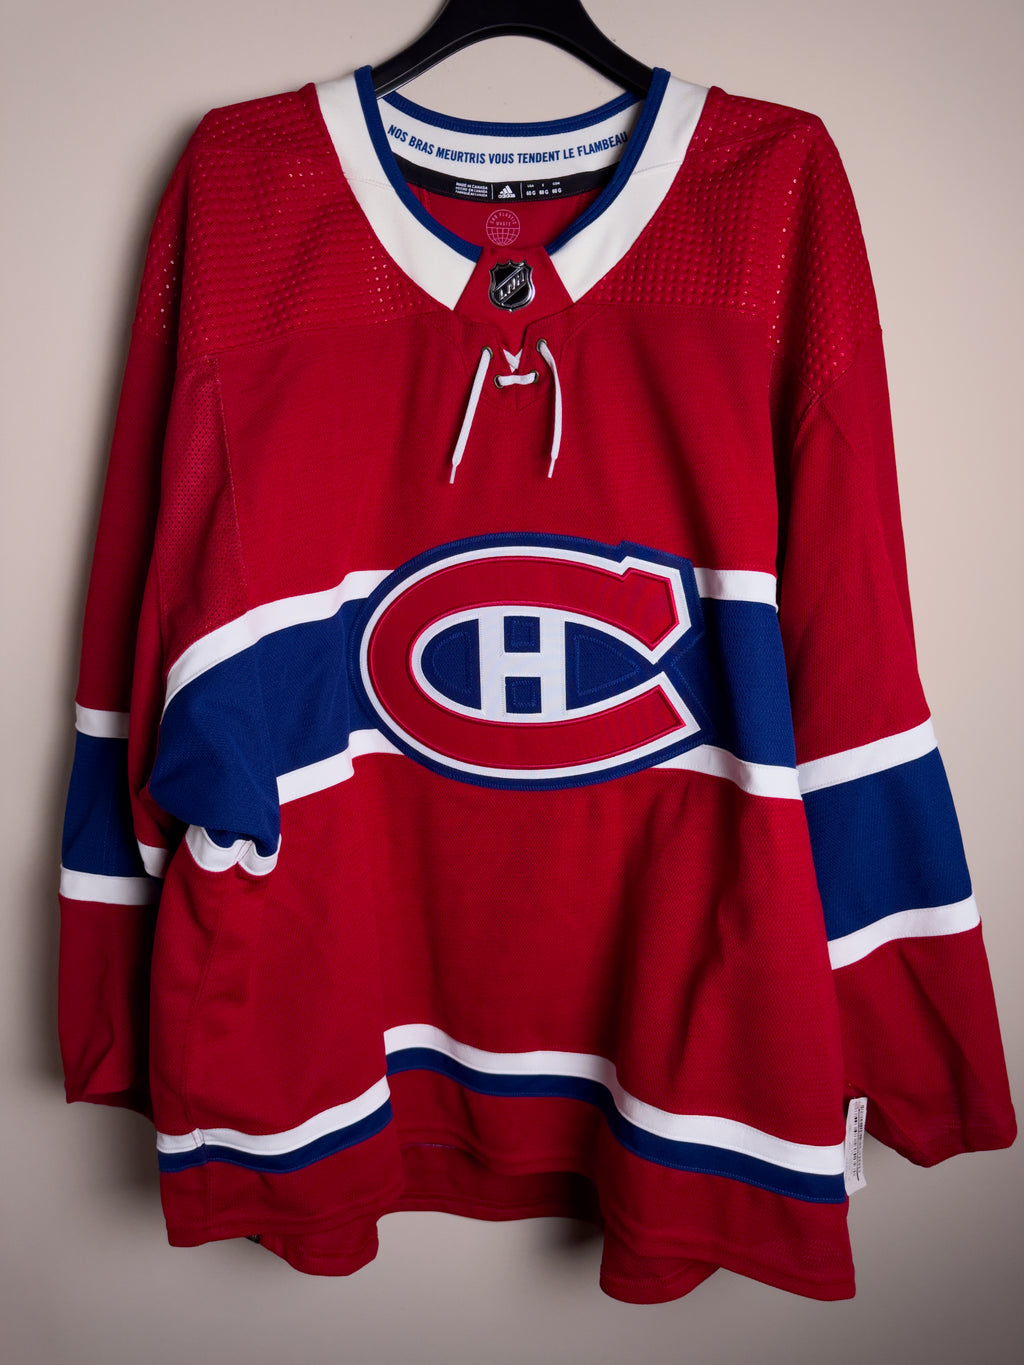 Montreal Canadiens NHL Adidas Primegreen MiC Team Issued Home Jersey Size 60G (Goalie Cut)